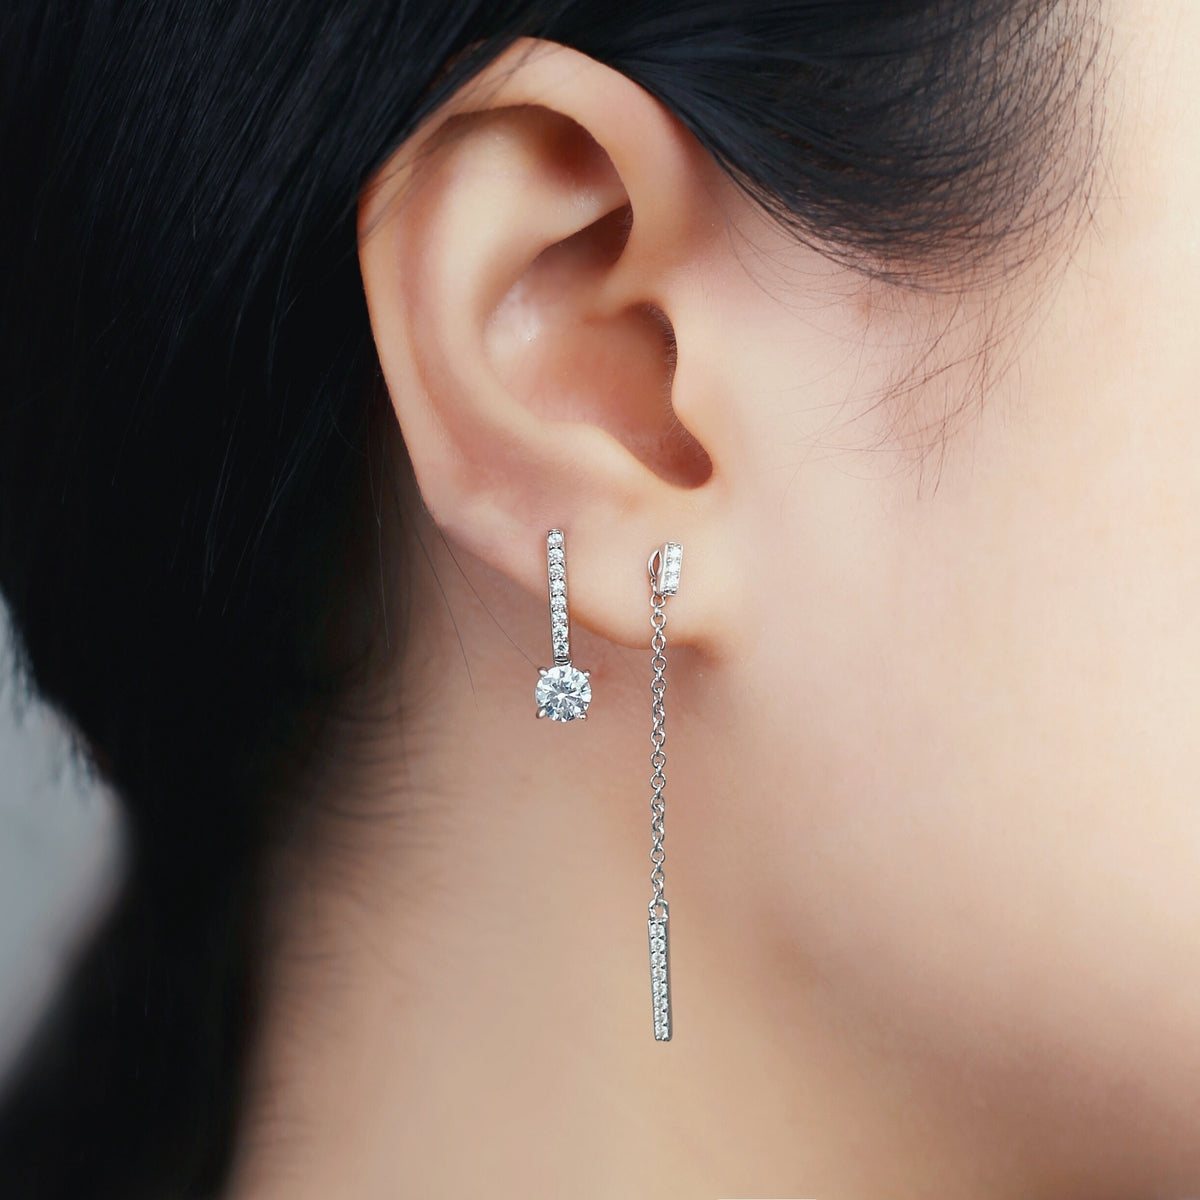 Pave Bar with Round Stone Drop Earrings